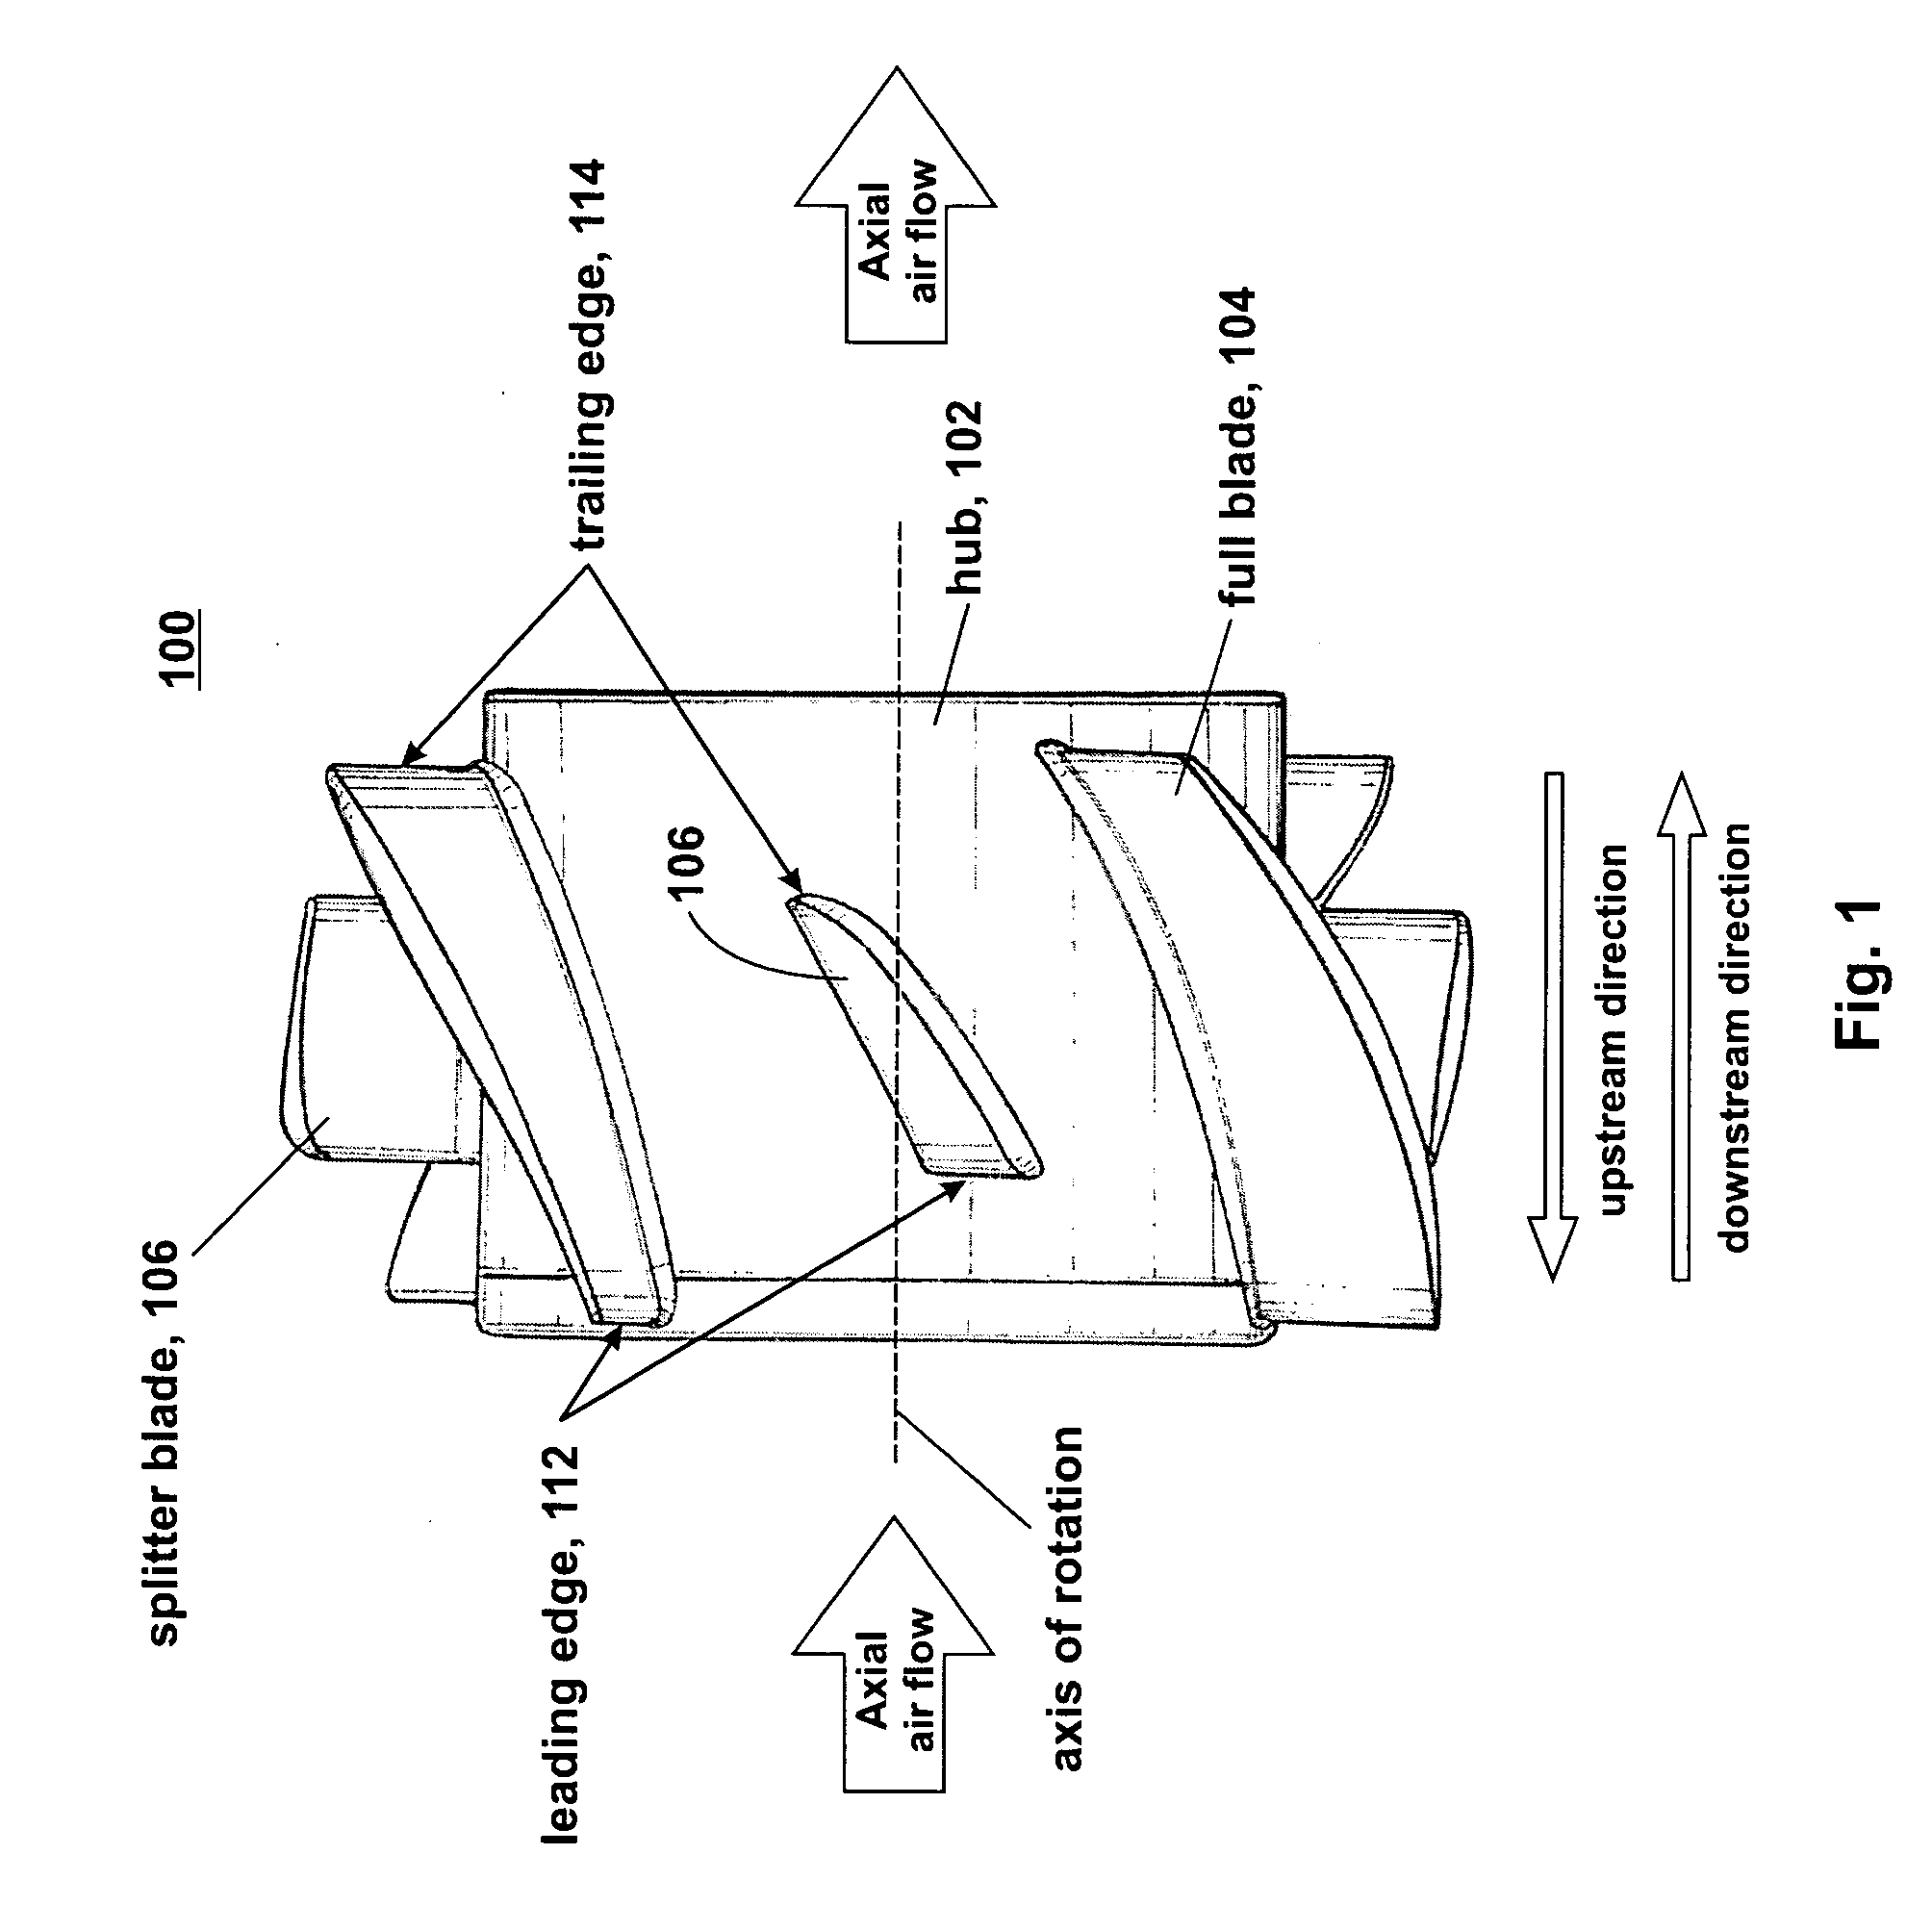 Reduction of tonal noise in cooling fans using splitter blades